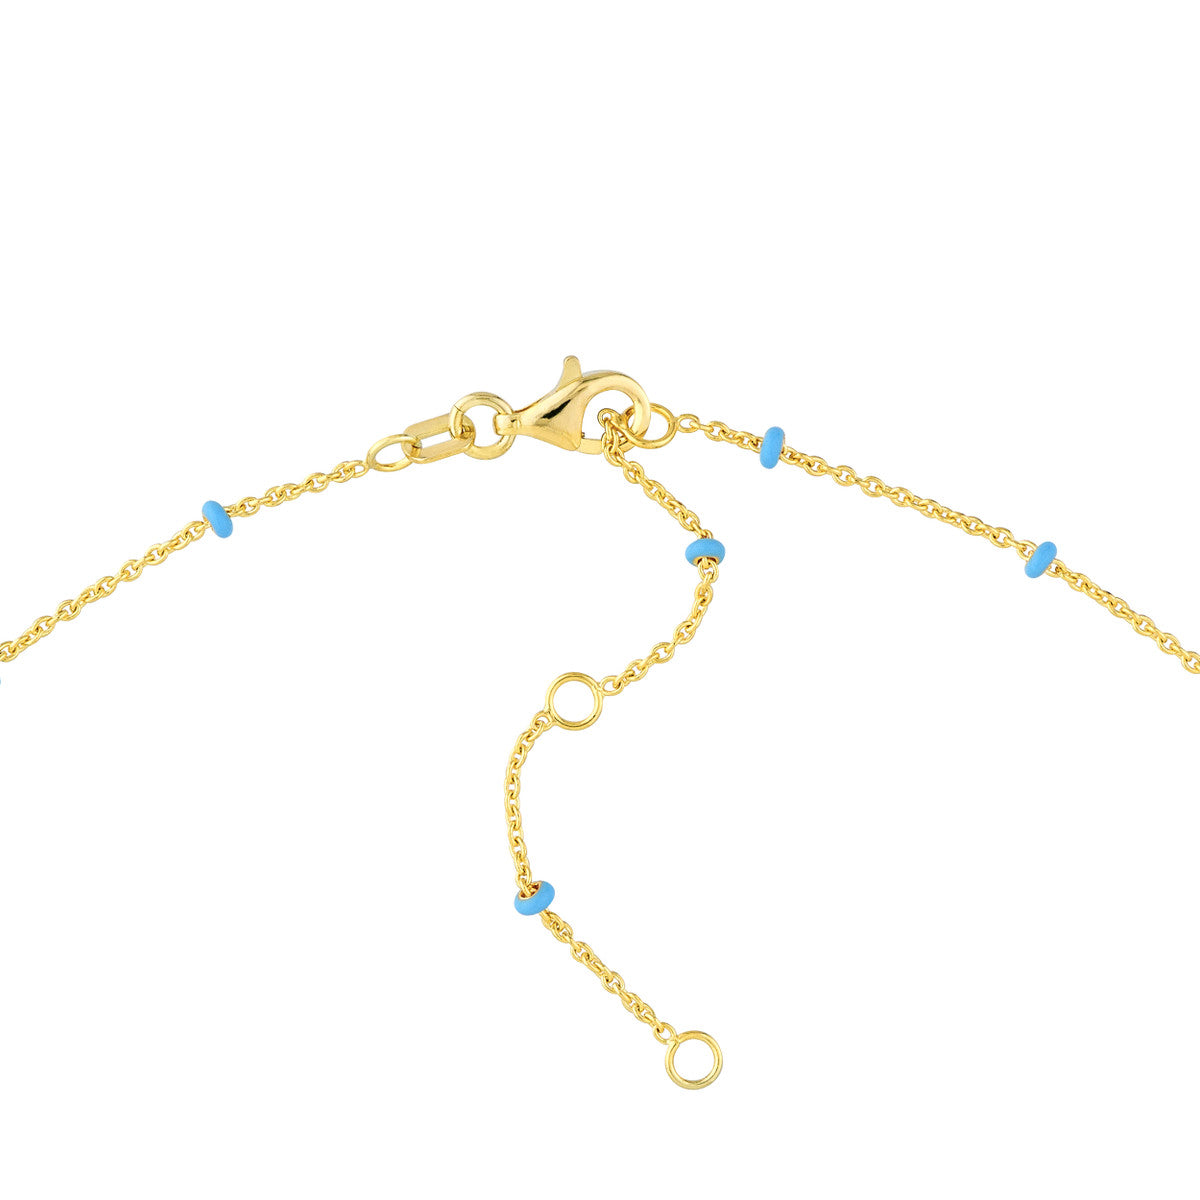 14K GOLD ROLO CHAIN WITH LIGHT BLUE ENAMEL BEADS